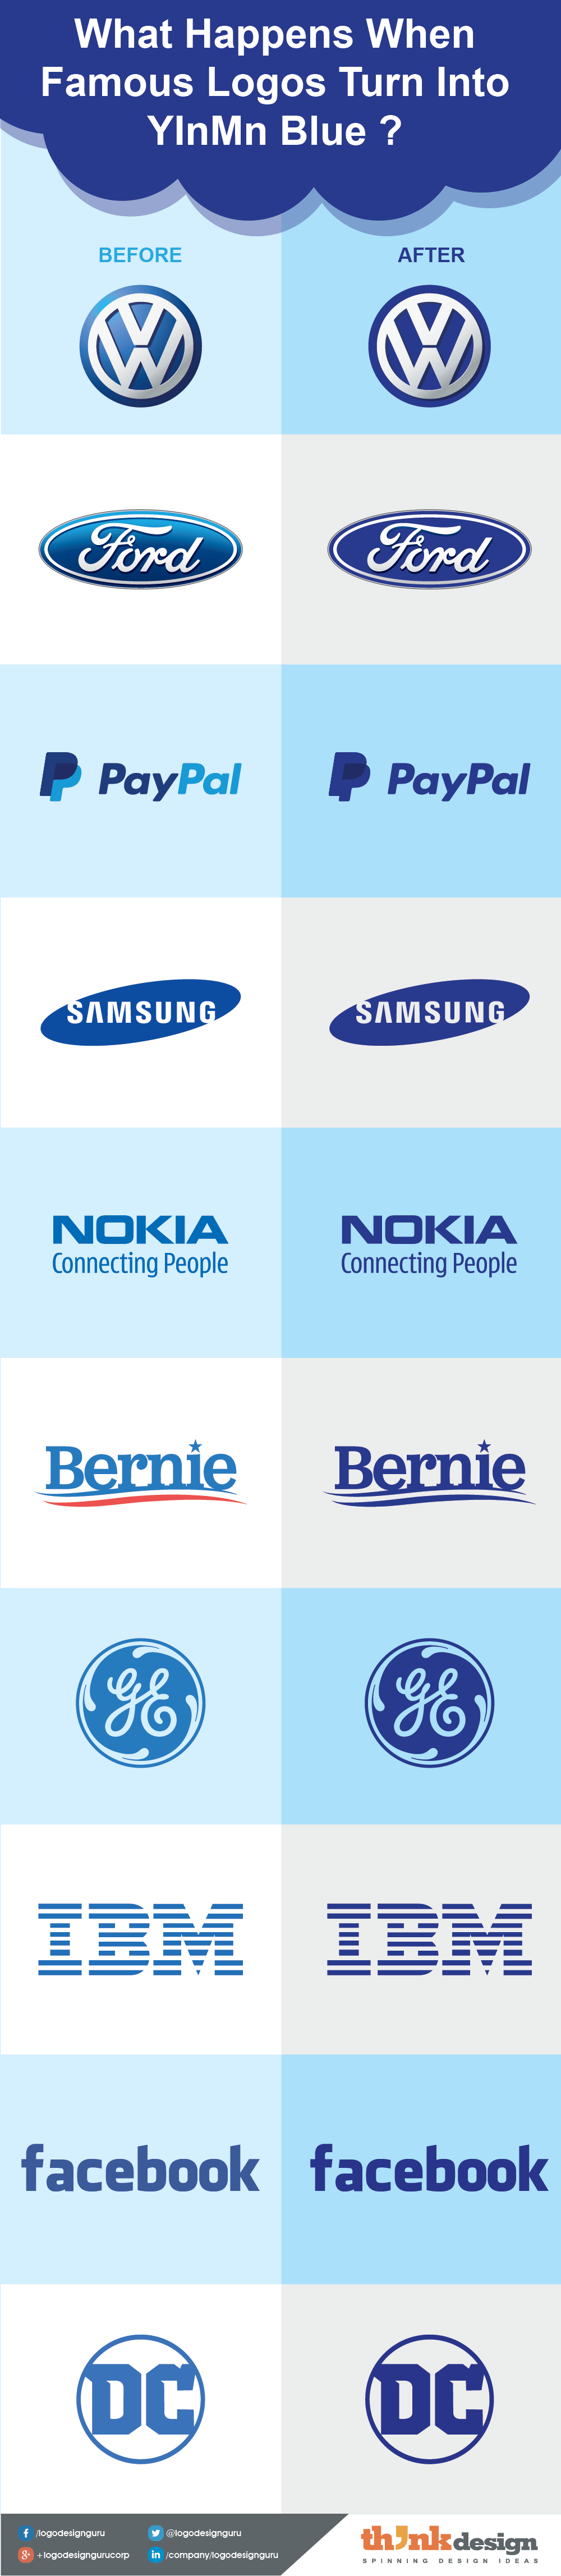 Popular Blue Logo - Can YInMn Blue Change The Meaning Of Famous Logos? | Think Design